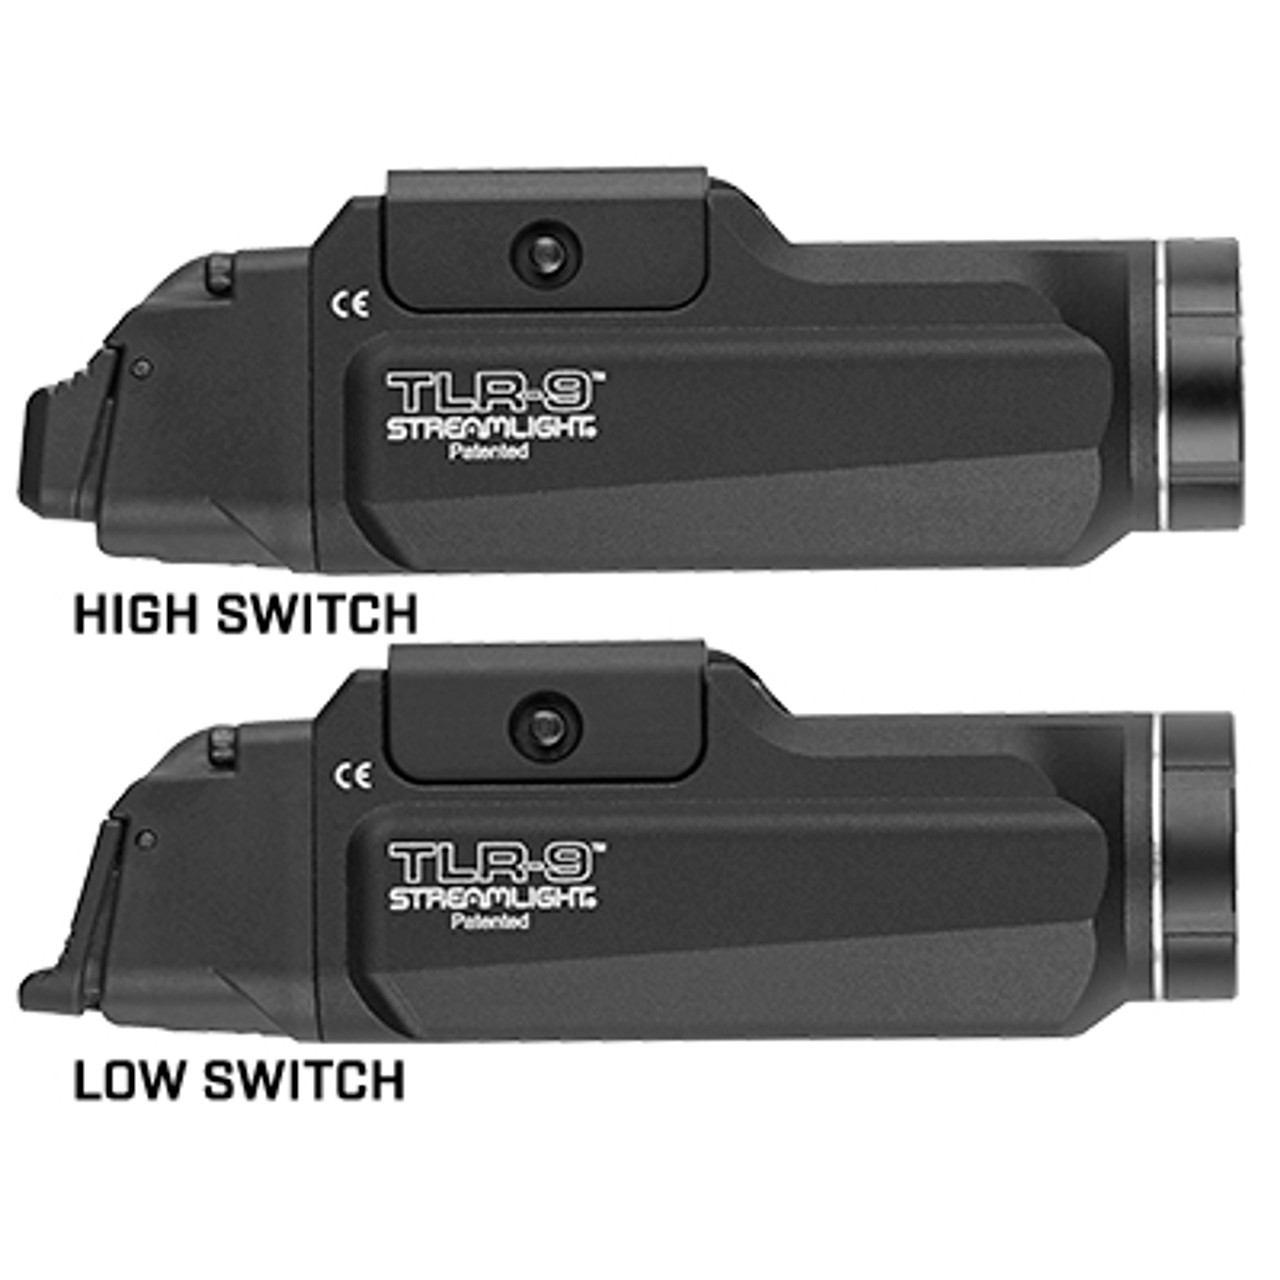 Streamlight - TLR-9™ GUN LIGHT WITH AMBIDEXTROUS REAR SWITCH OPTIONS